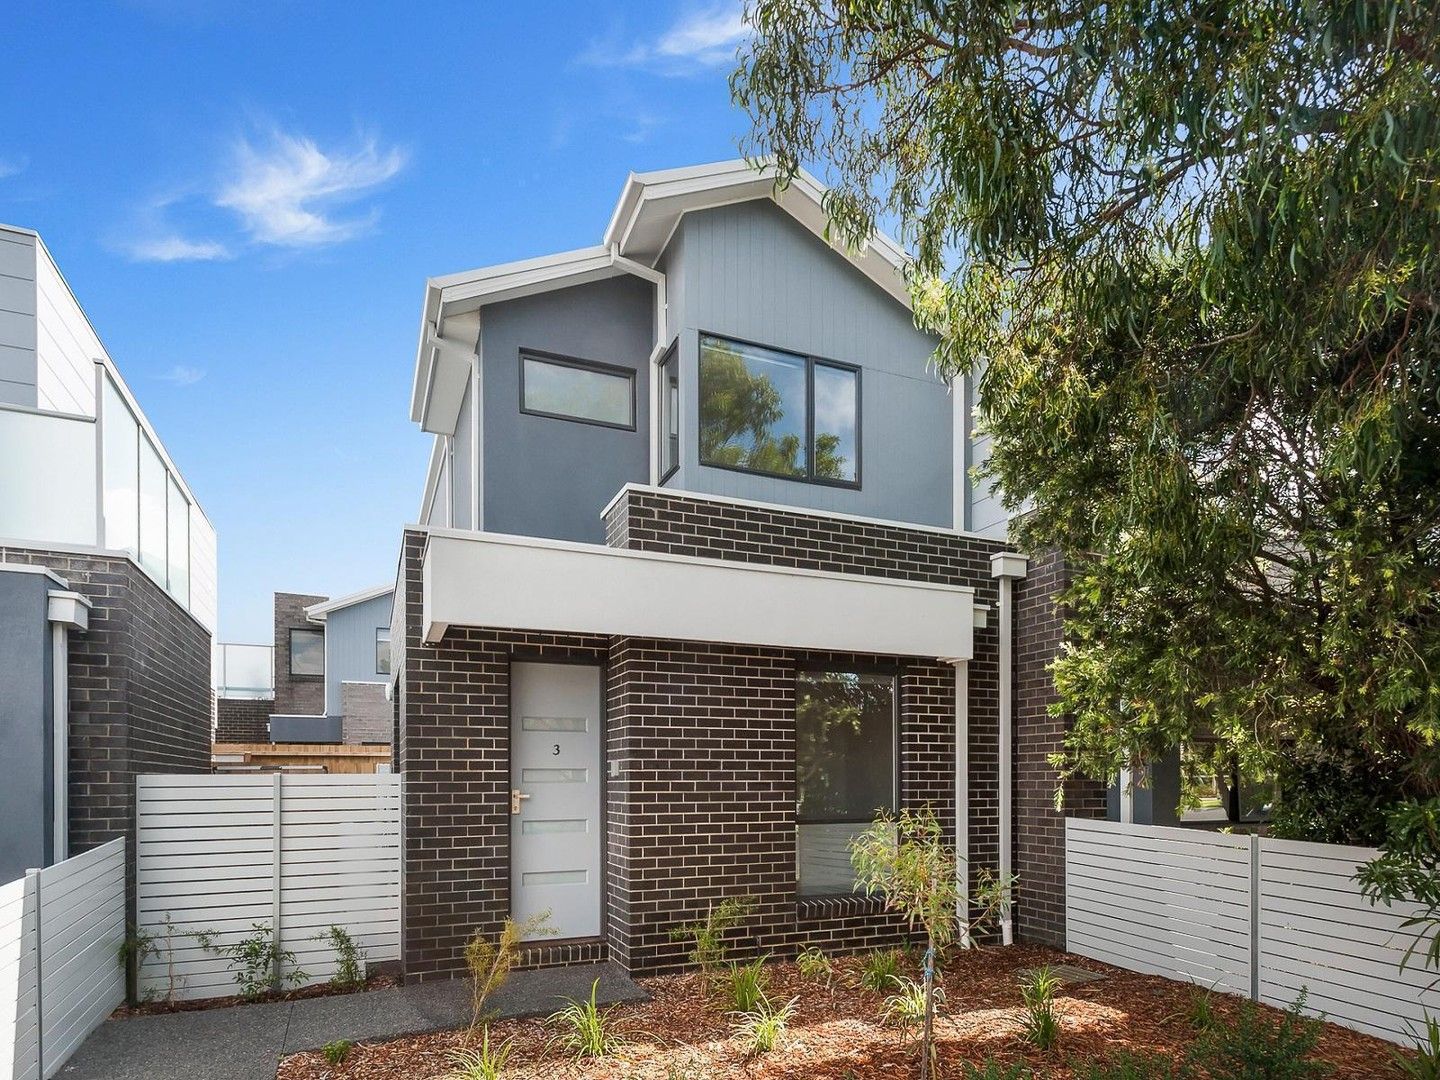 2 bedrooms Townhouse in 4/79-81 Mansfield Street THORNBURY VIC, 3071